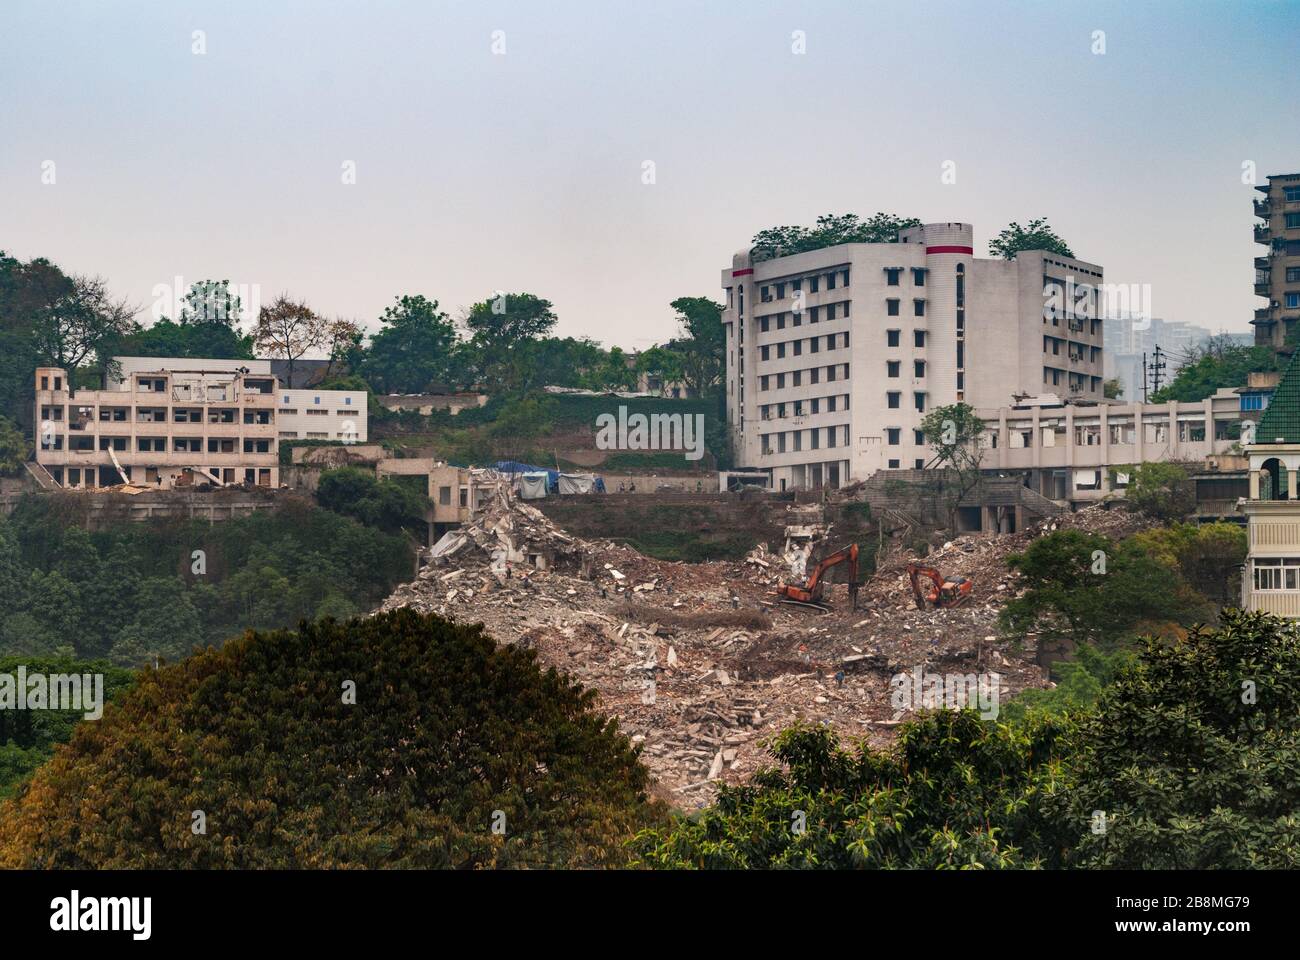 Chongqing, China - May 9, 2010: Downtown, off Peoples Square. Wide shot over huge demolition rubble site with old and newer buildings in back and some Stock Photo